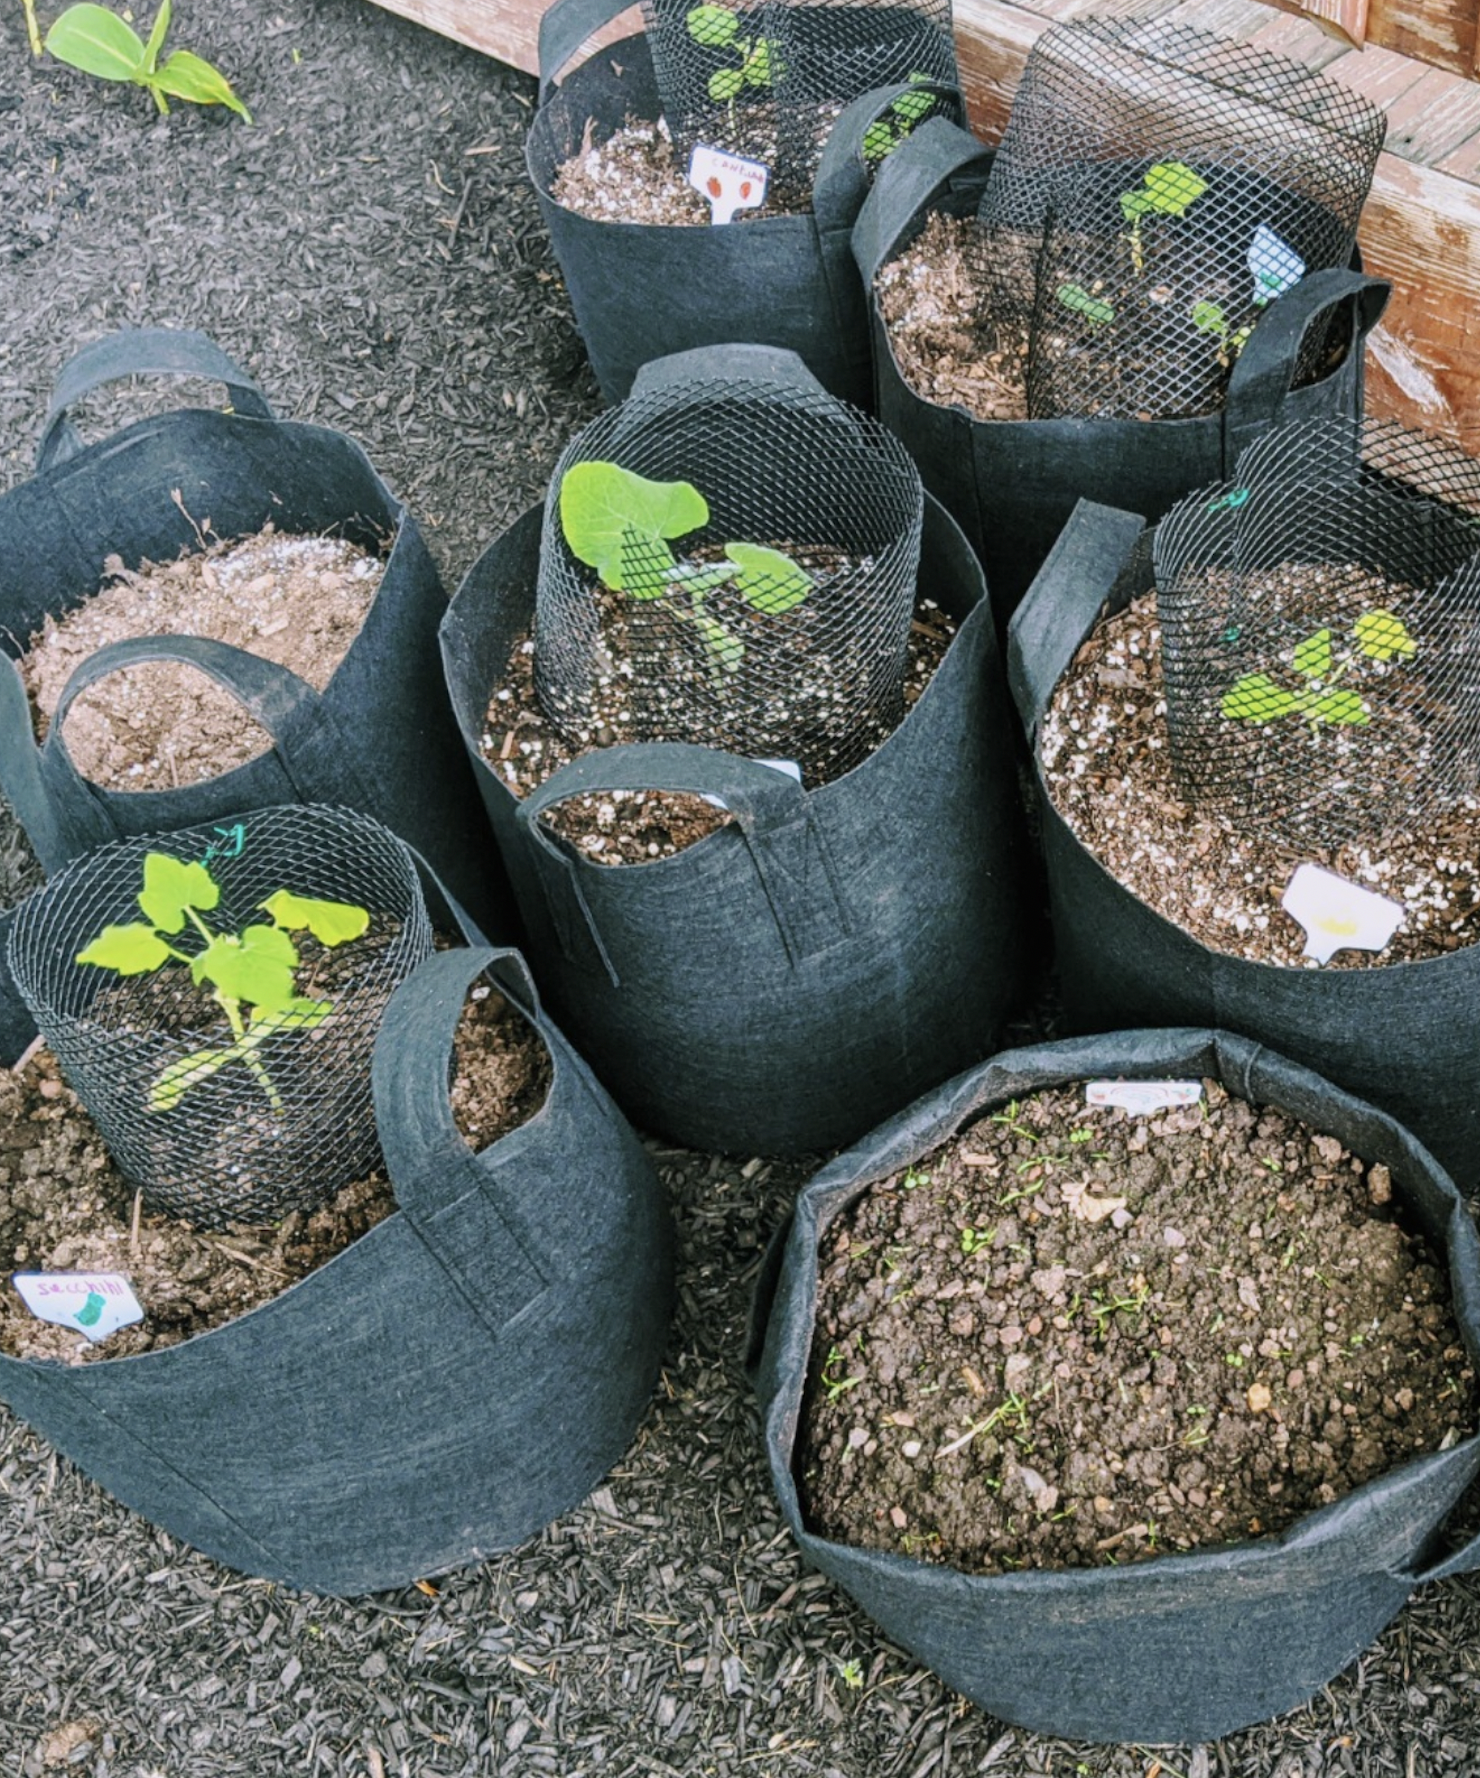 Gardeners can reuse, recycle last year's potting soil